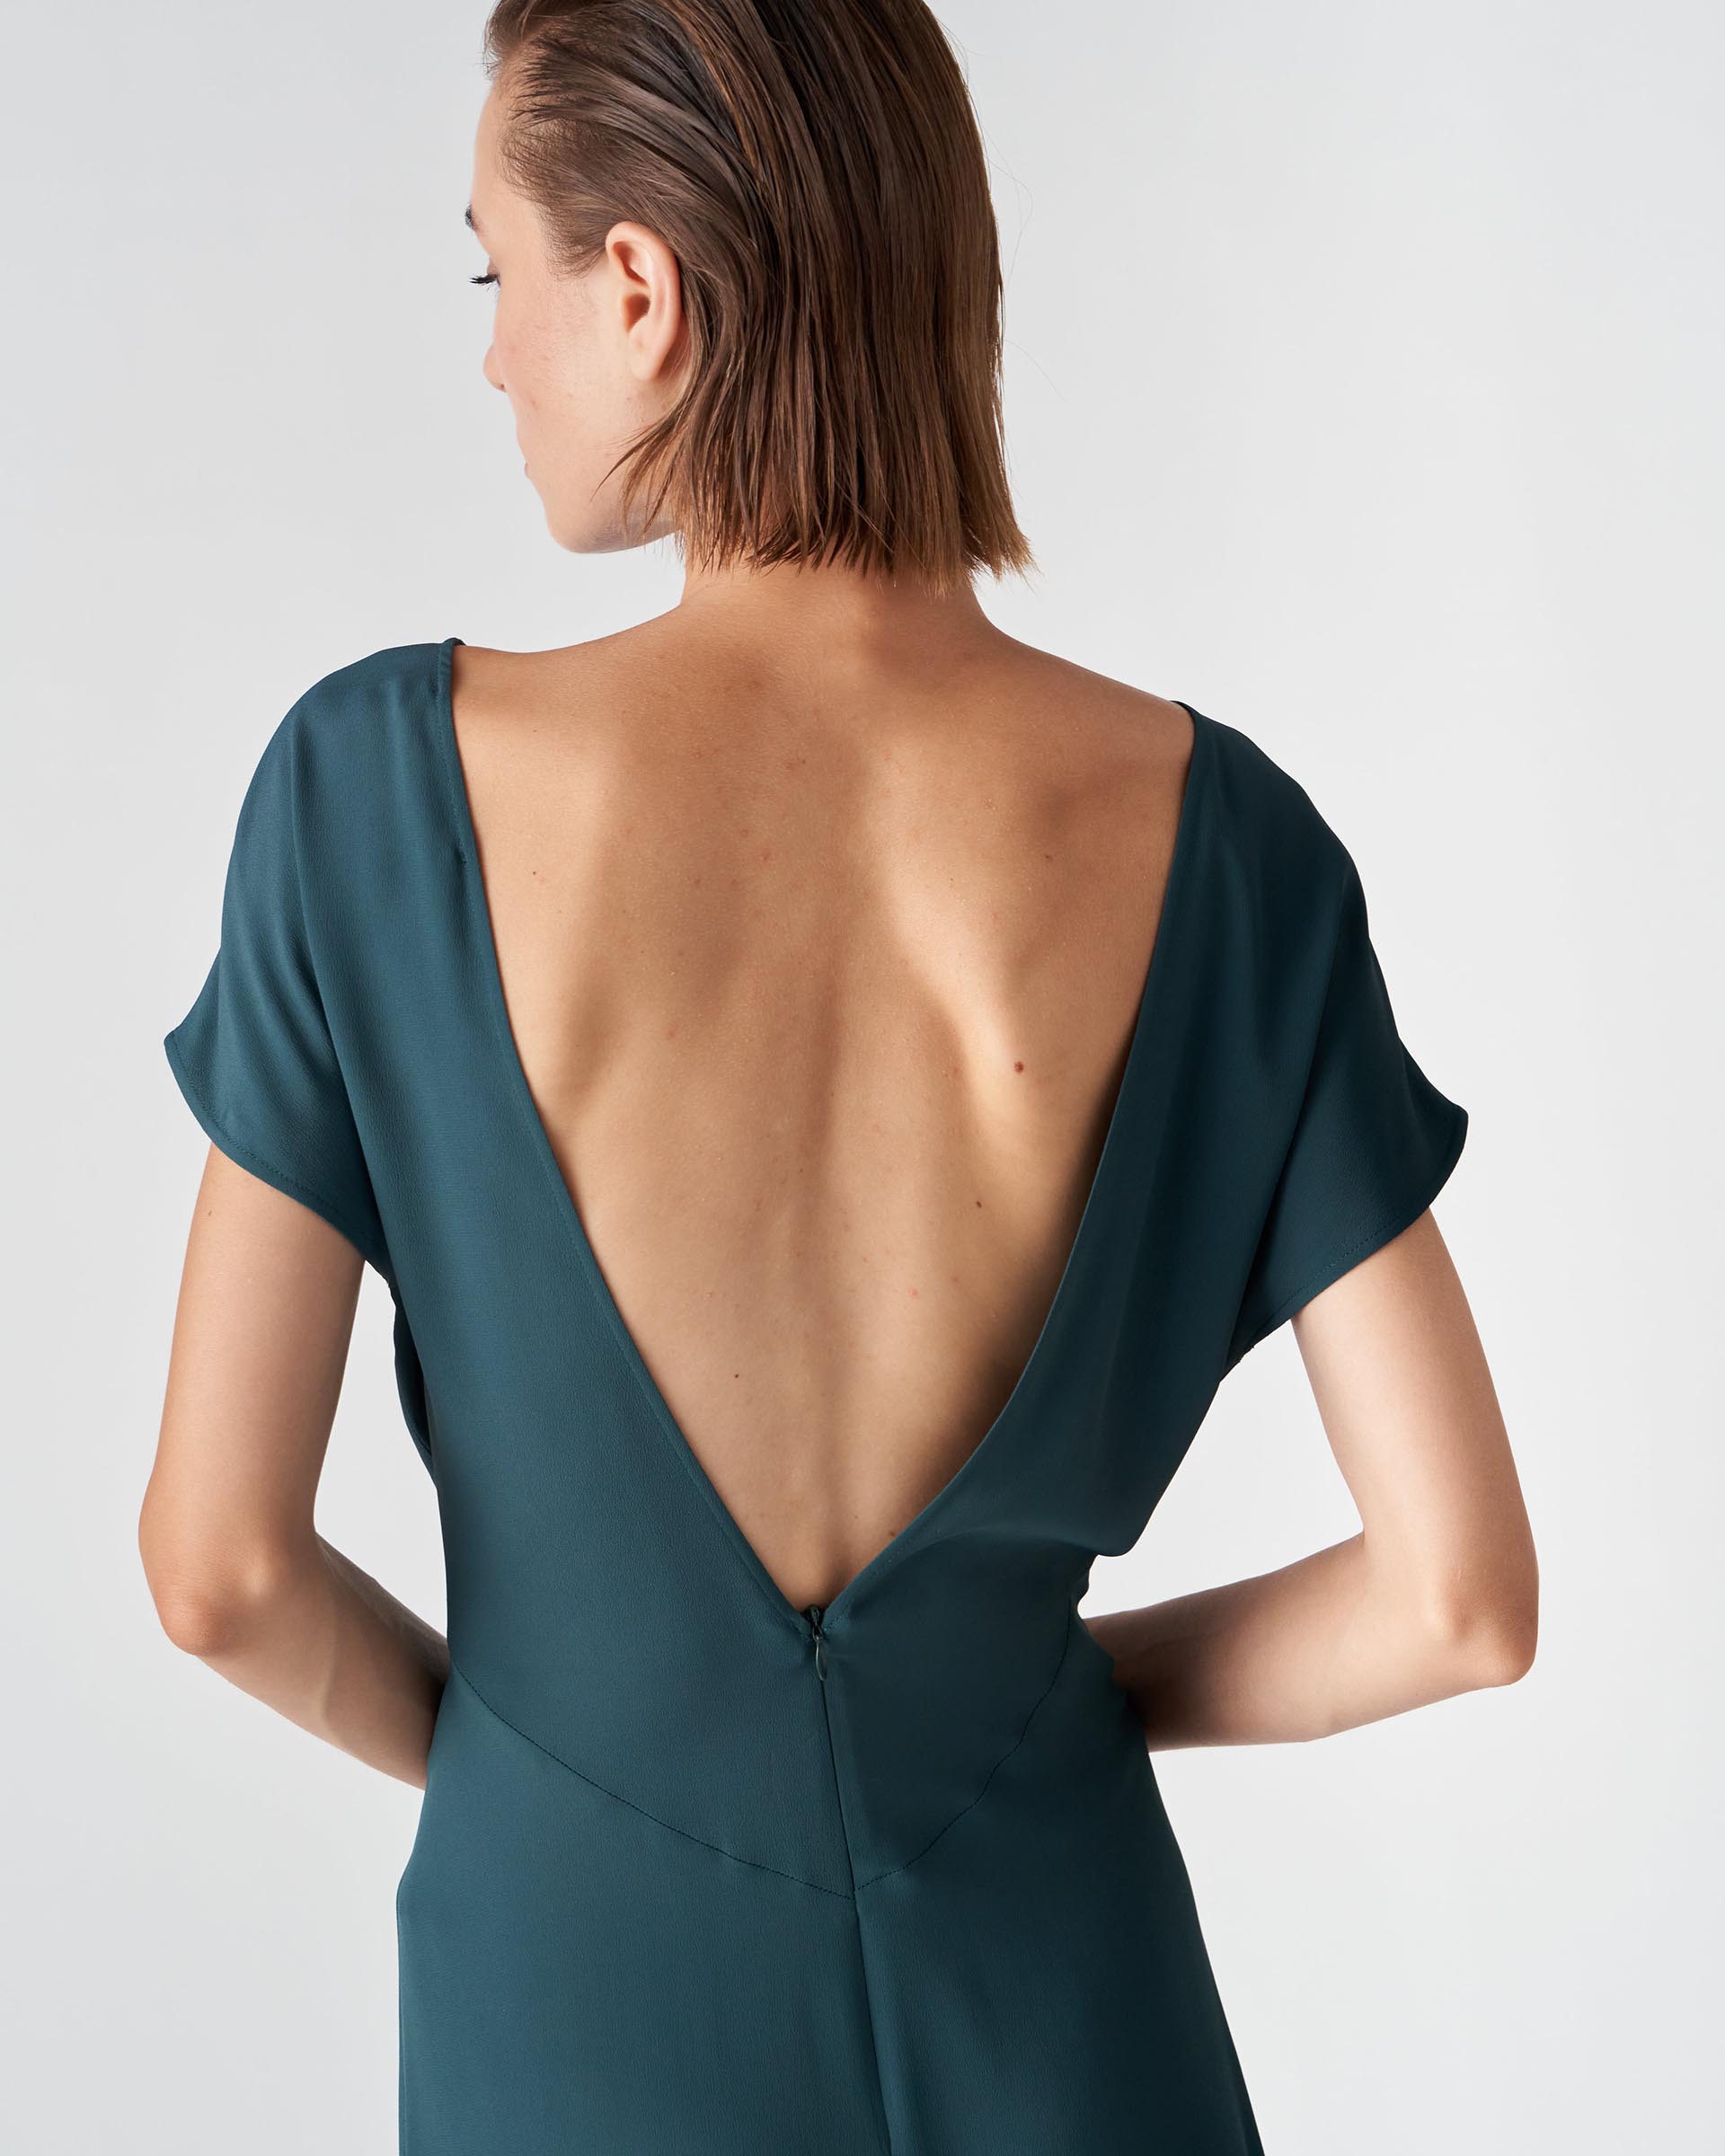 The Market Store | Dress With Back Neckline